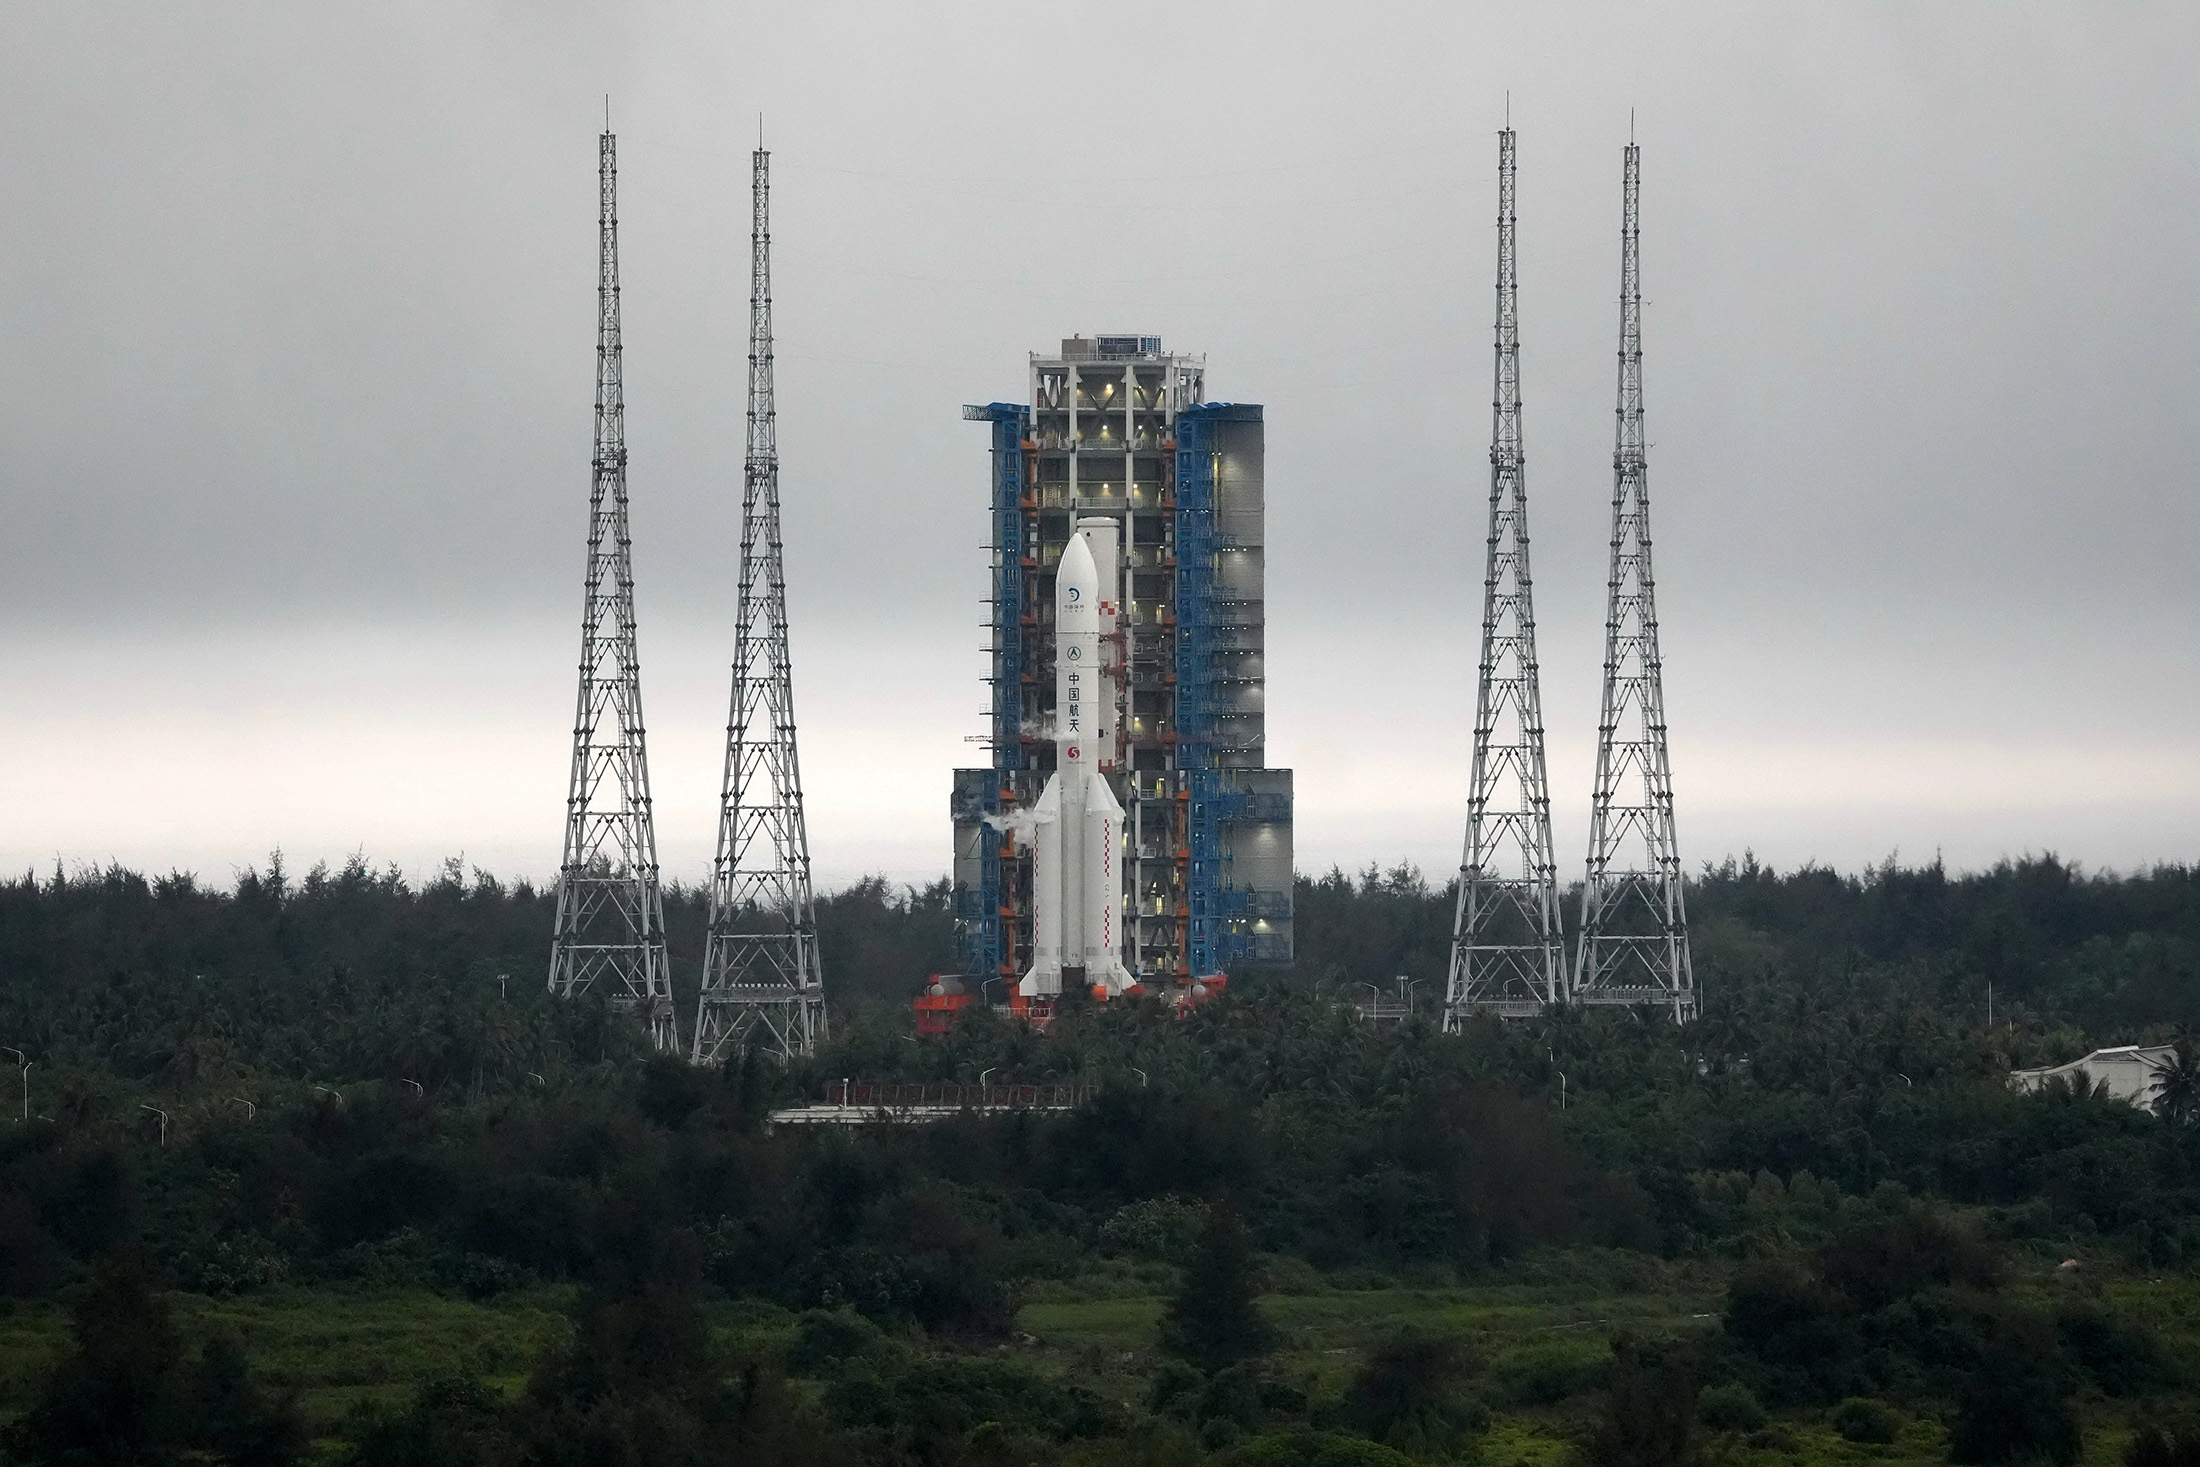 China's Chang'e-6 lunar mission rocket prepares to lift off from the Wenchang Satellite Launch Center in south China's Hainan province on May 3.